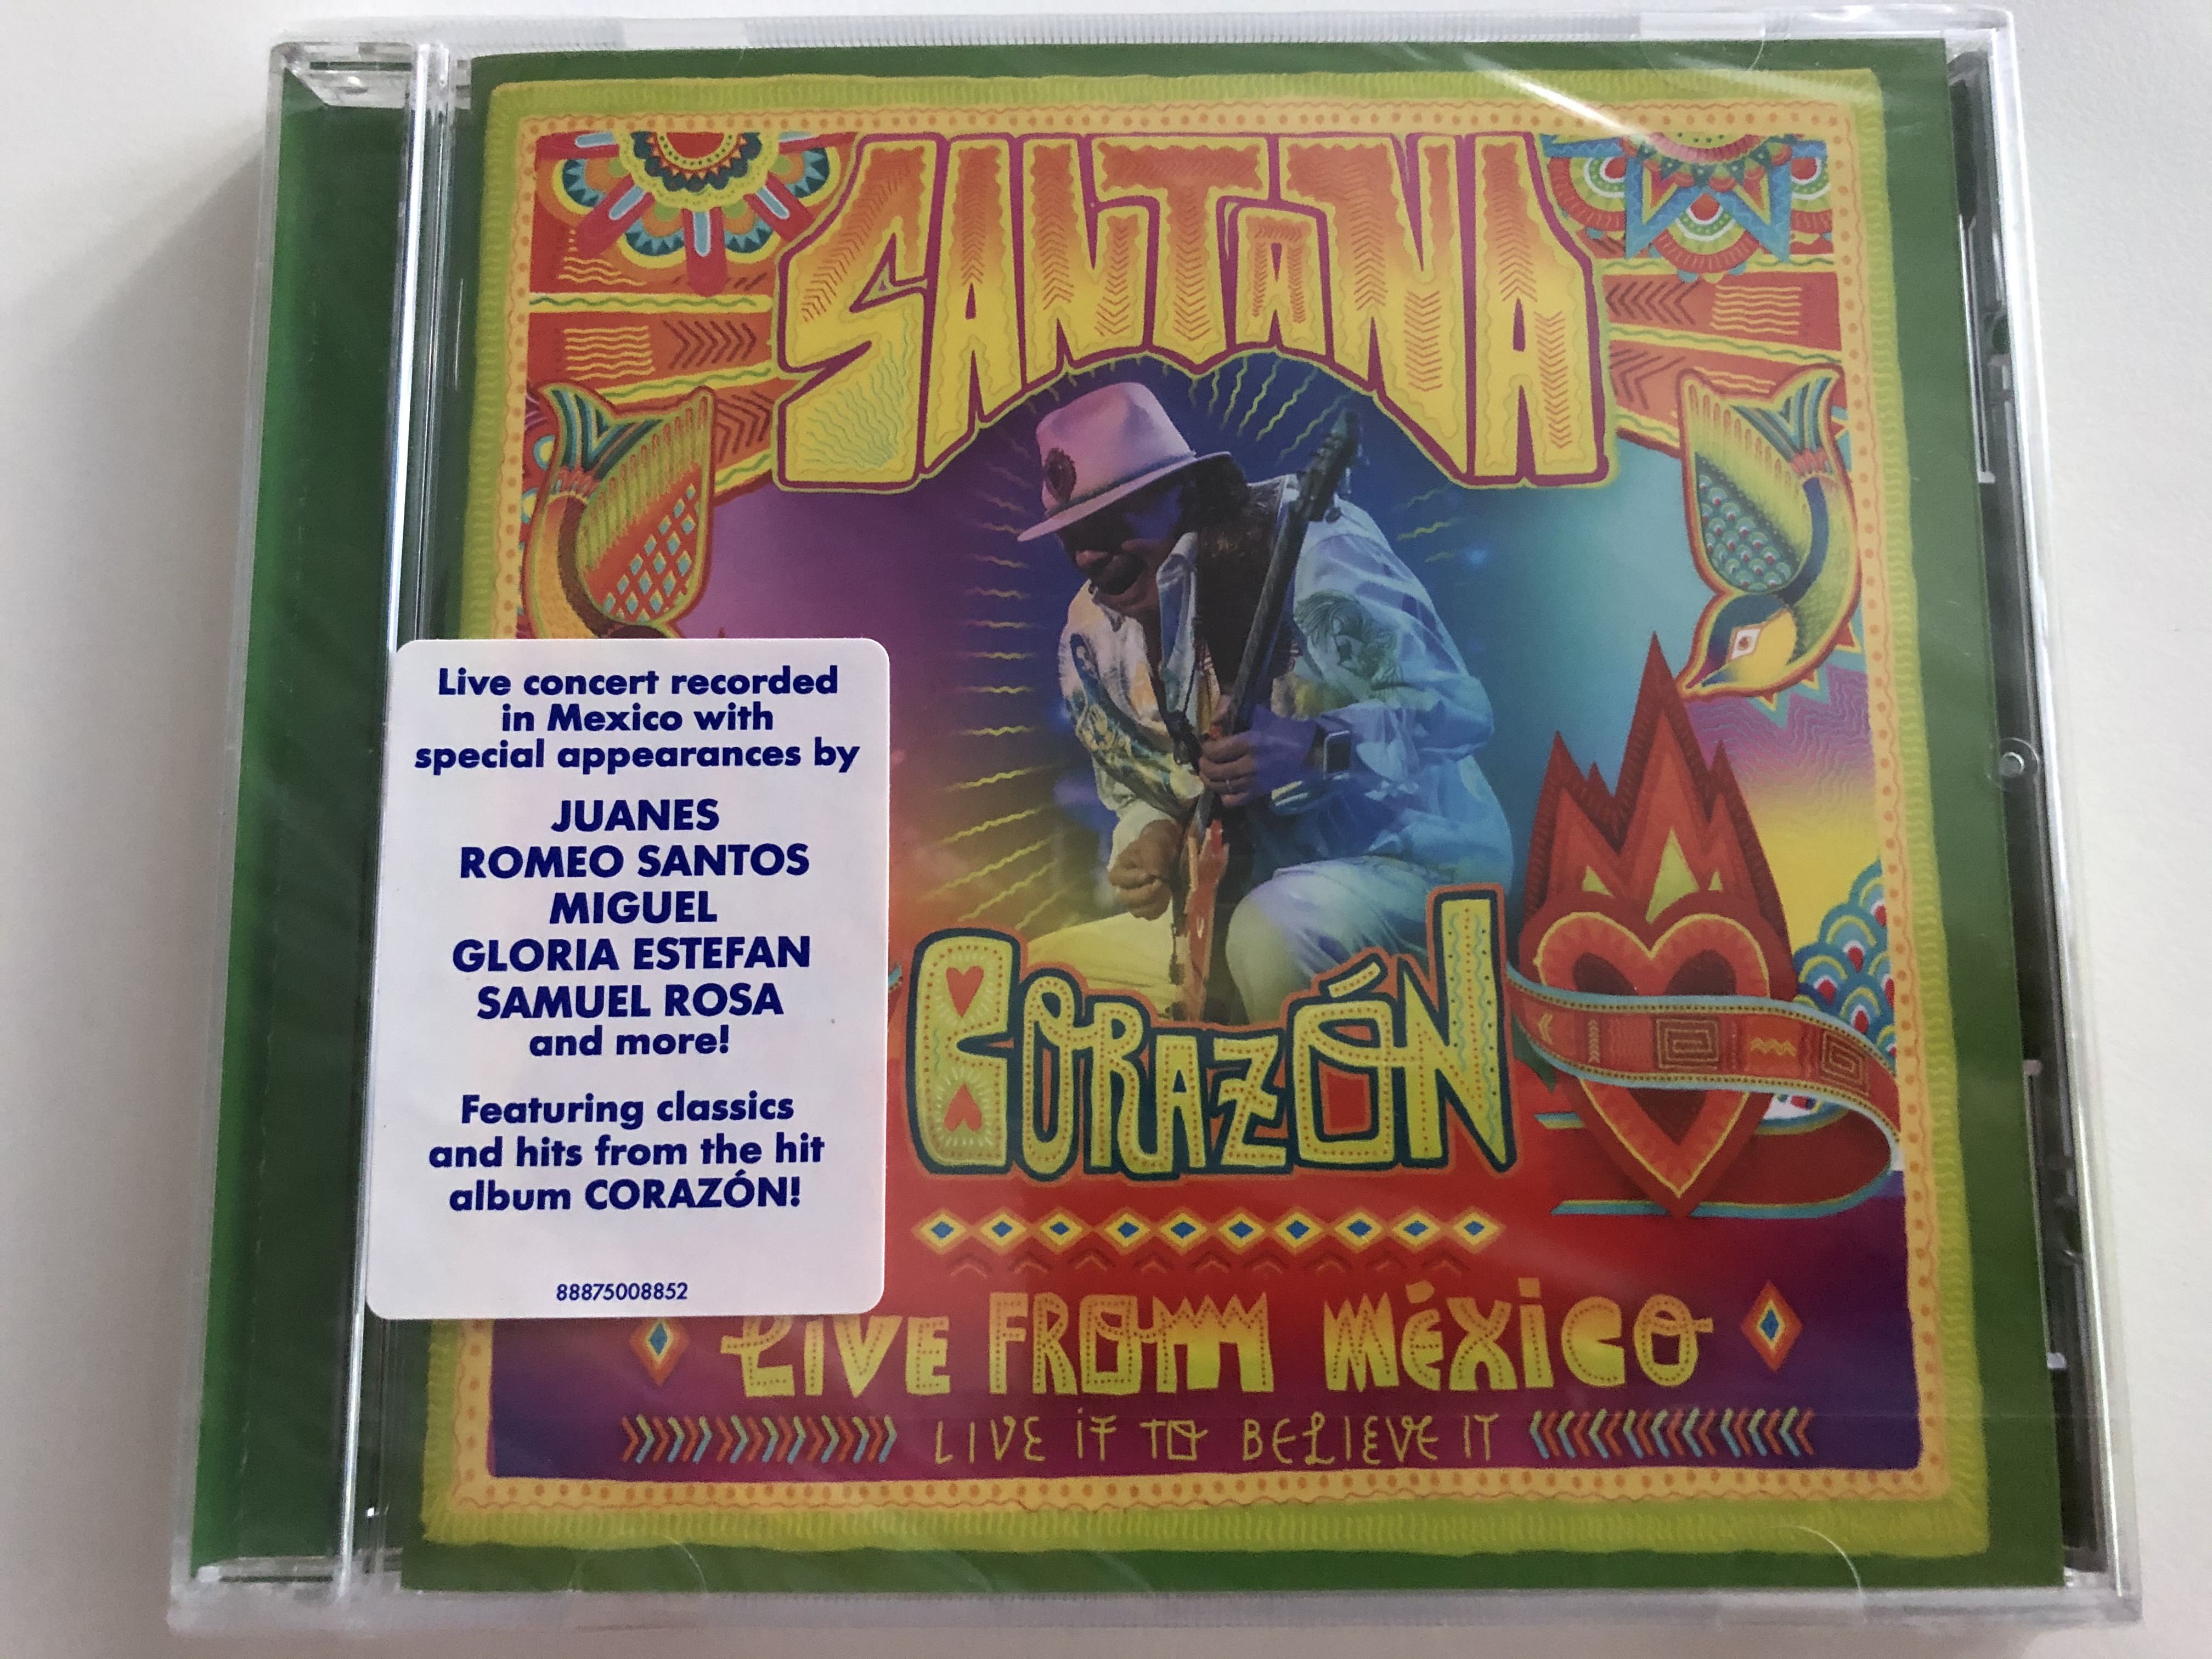 santana-coraz-n-live-from-mexico-live-it-to-believe-it-live-concert-recorded-in-mexico-with-special-appearances-by-juanes-romeo-santos-miguel-gloria-estefan-samuel-rosa-and-more-r-1-.jpg